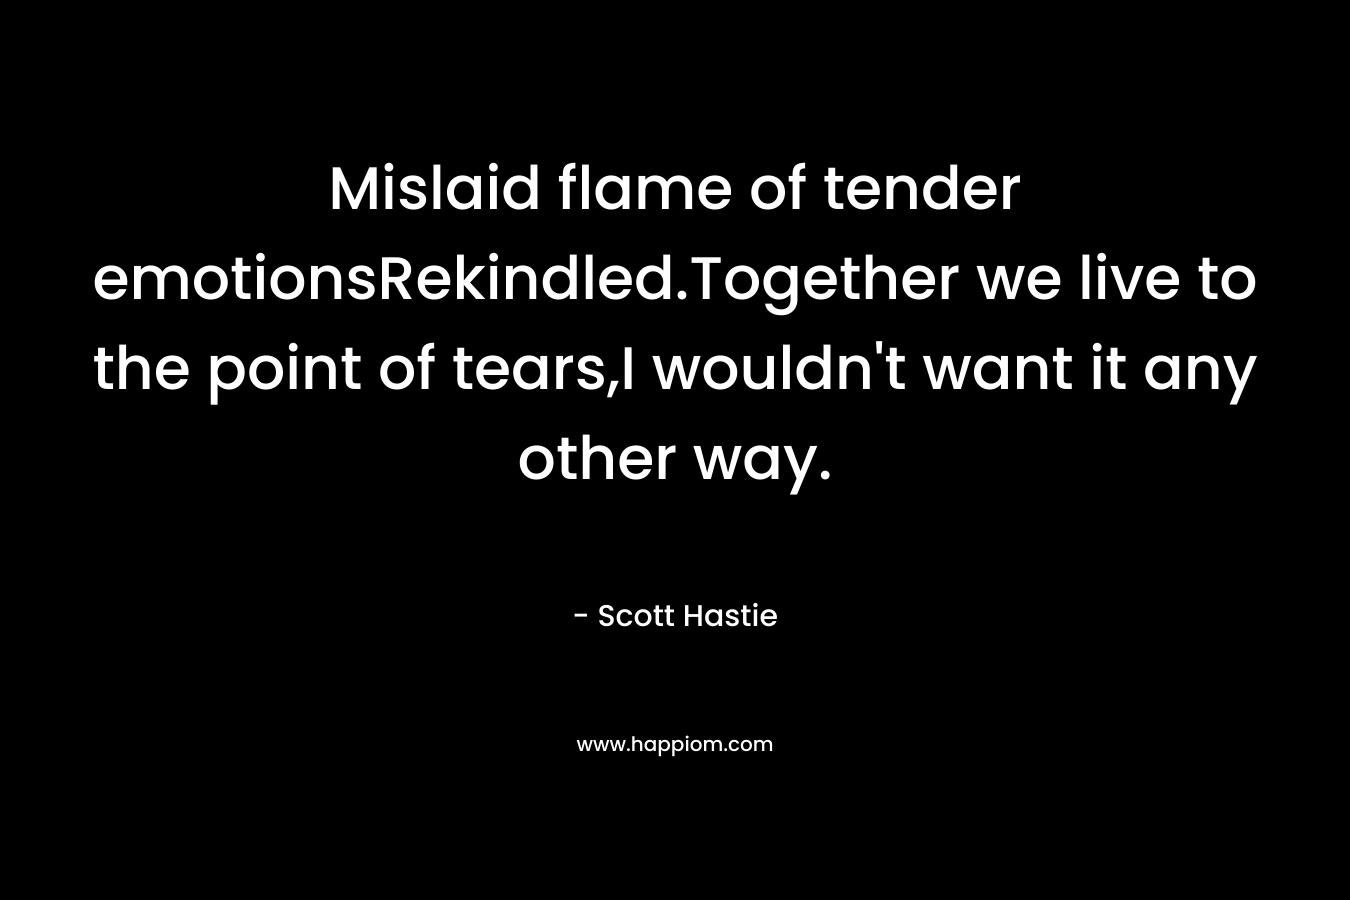 Mislaid flame of tender emotionsRekindled.Together we live to the point of tears,I wouldn’t want it any other way. – Scott Hastie